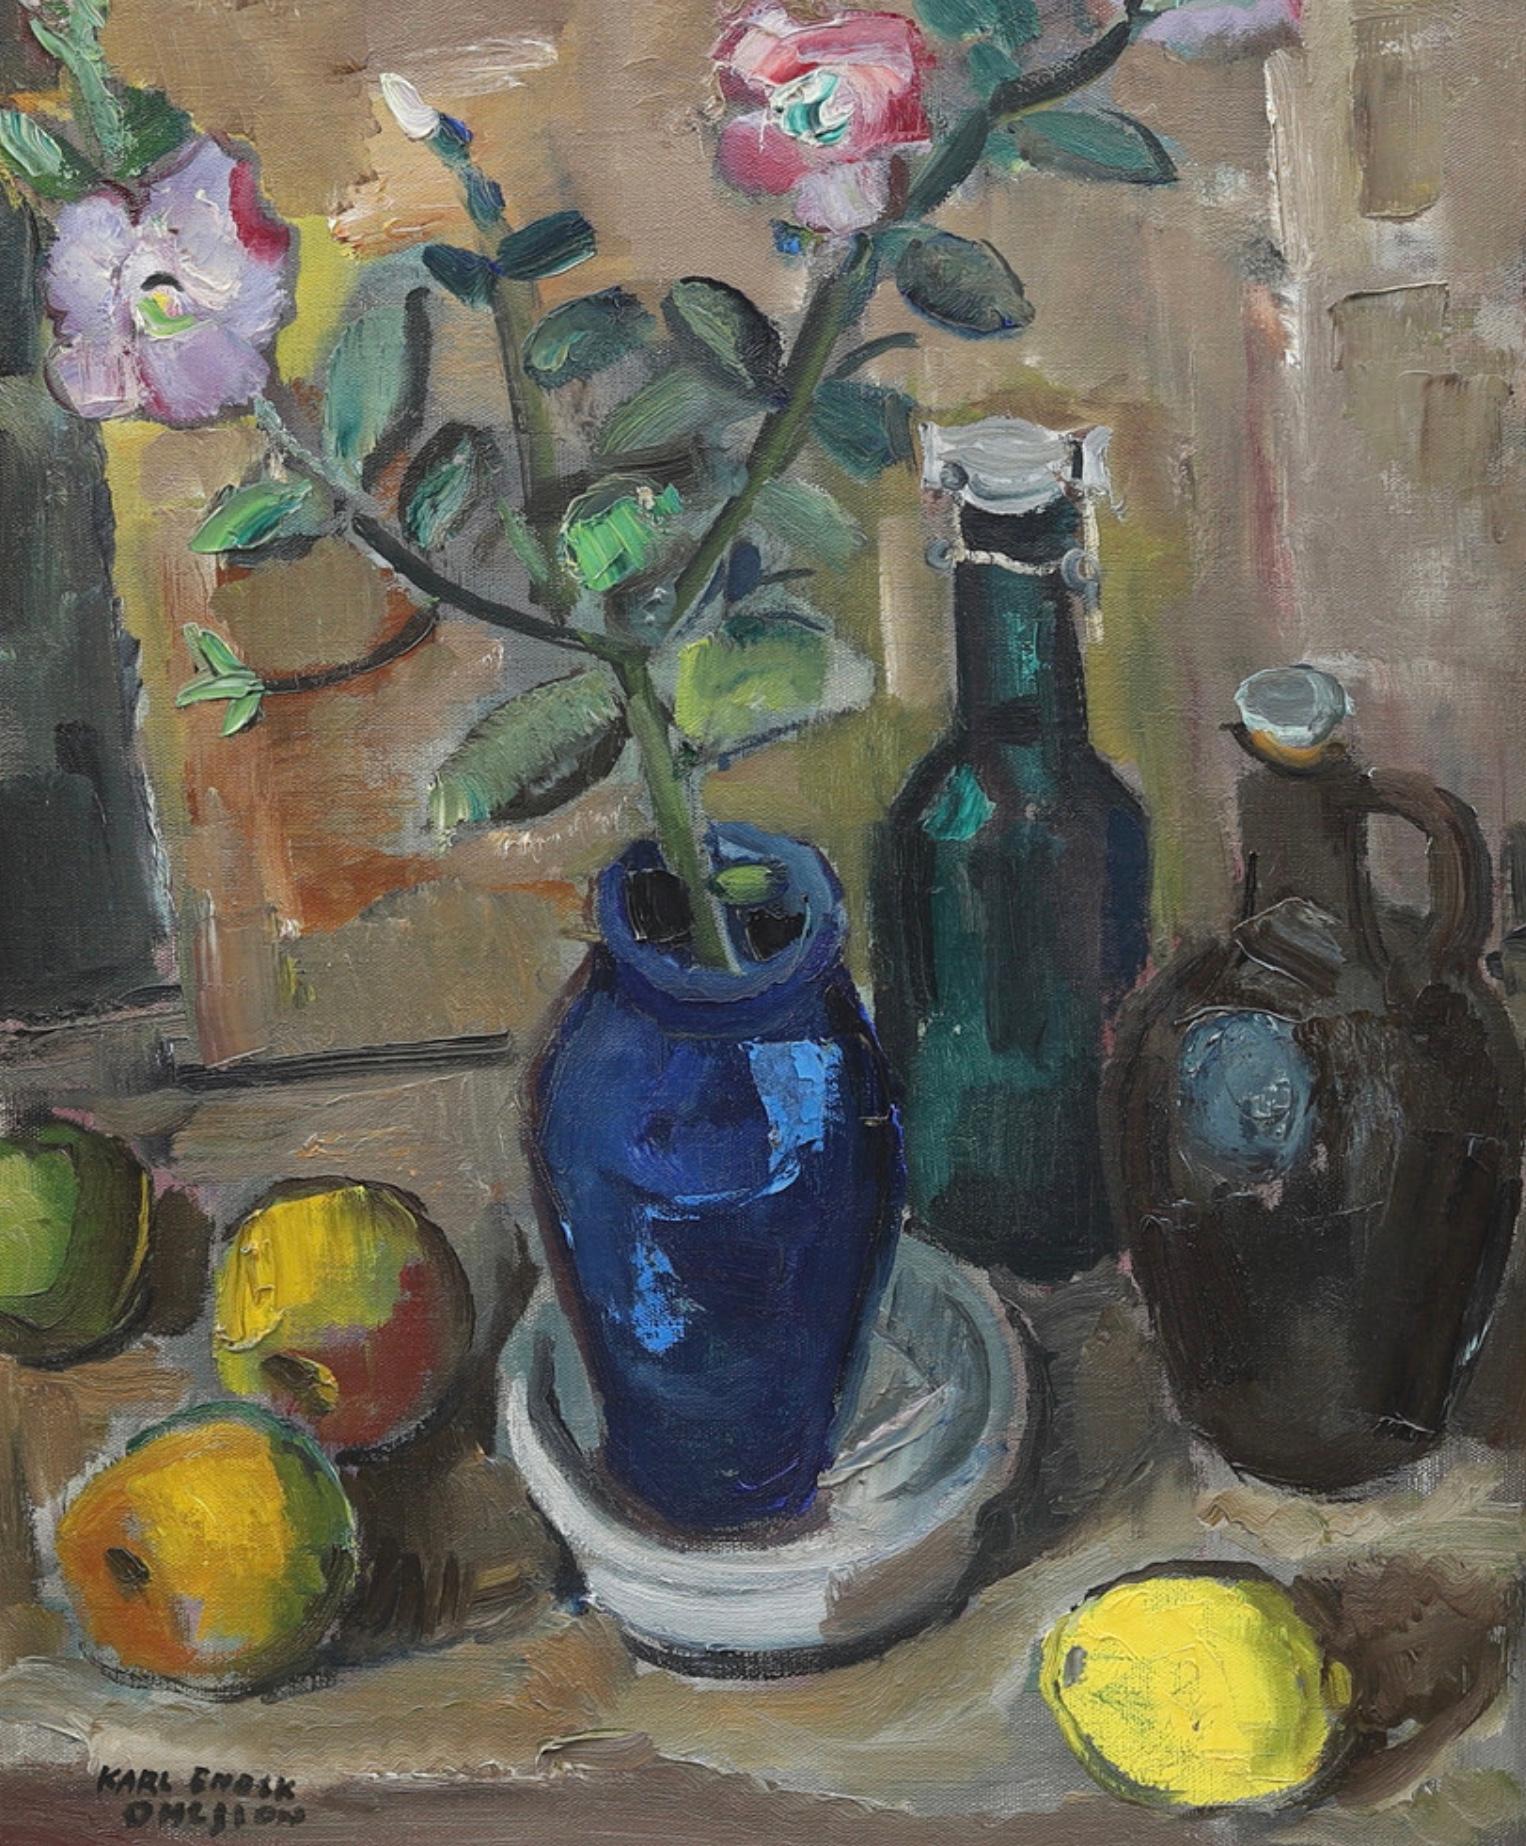 Pleasant and calming Swedish oil on canvas still life painting of a vase with a branch of flowering pink camellias surrounded by bottles and fruit.

Mid Circa 20th and signed by the artist Karl Ohlsson.